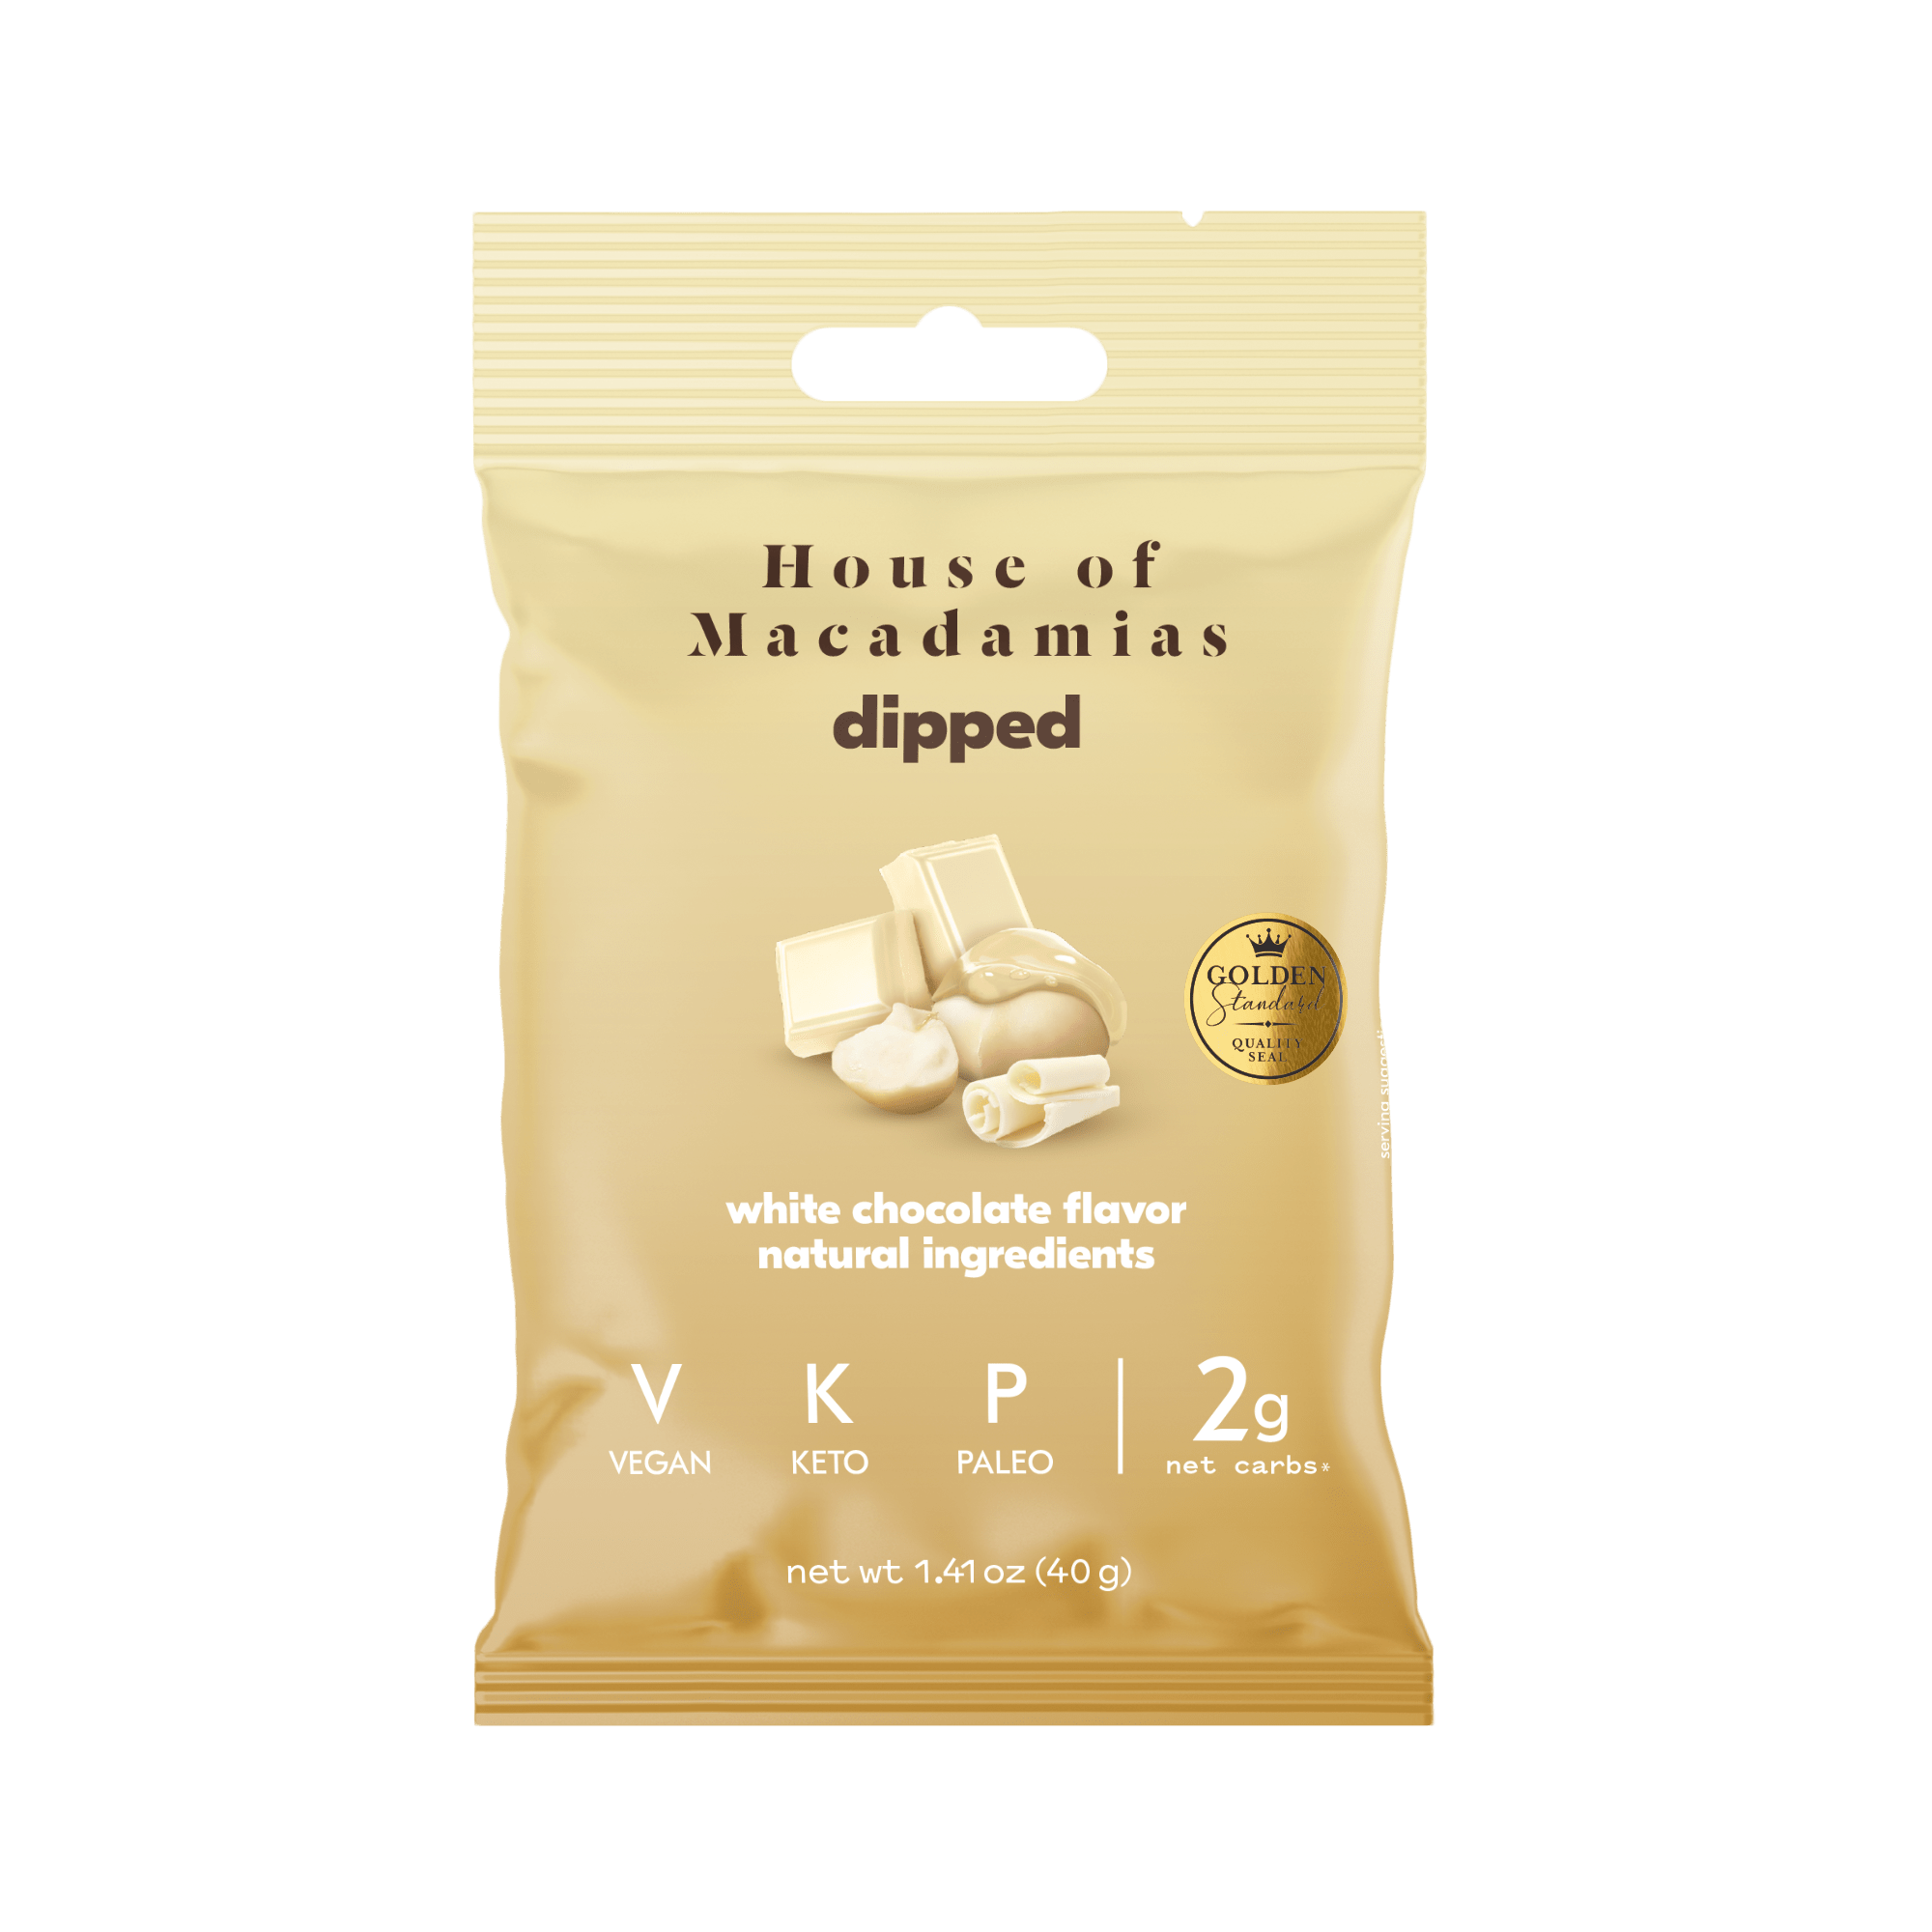 Macadamia Nut Variety Pack (6 Flavors, 12 Bags) - House of Macadamias - walnuts